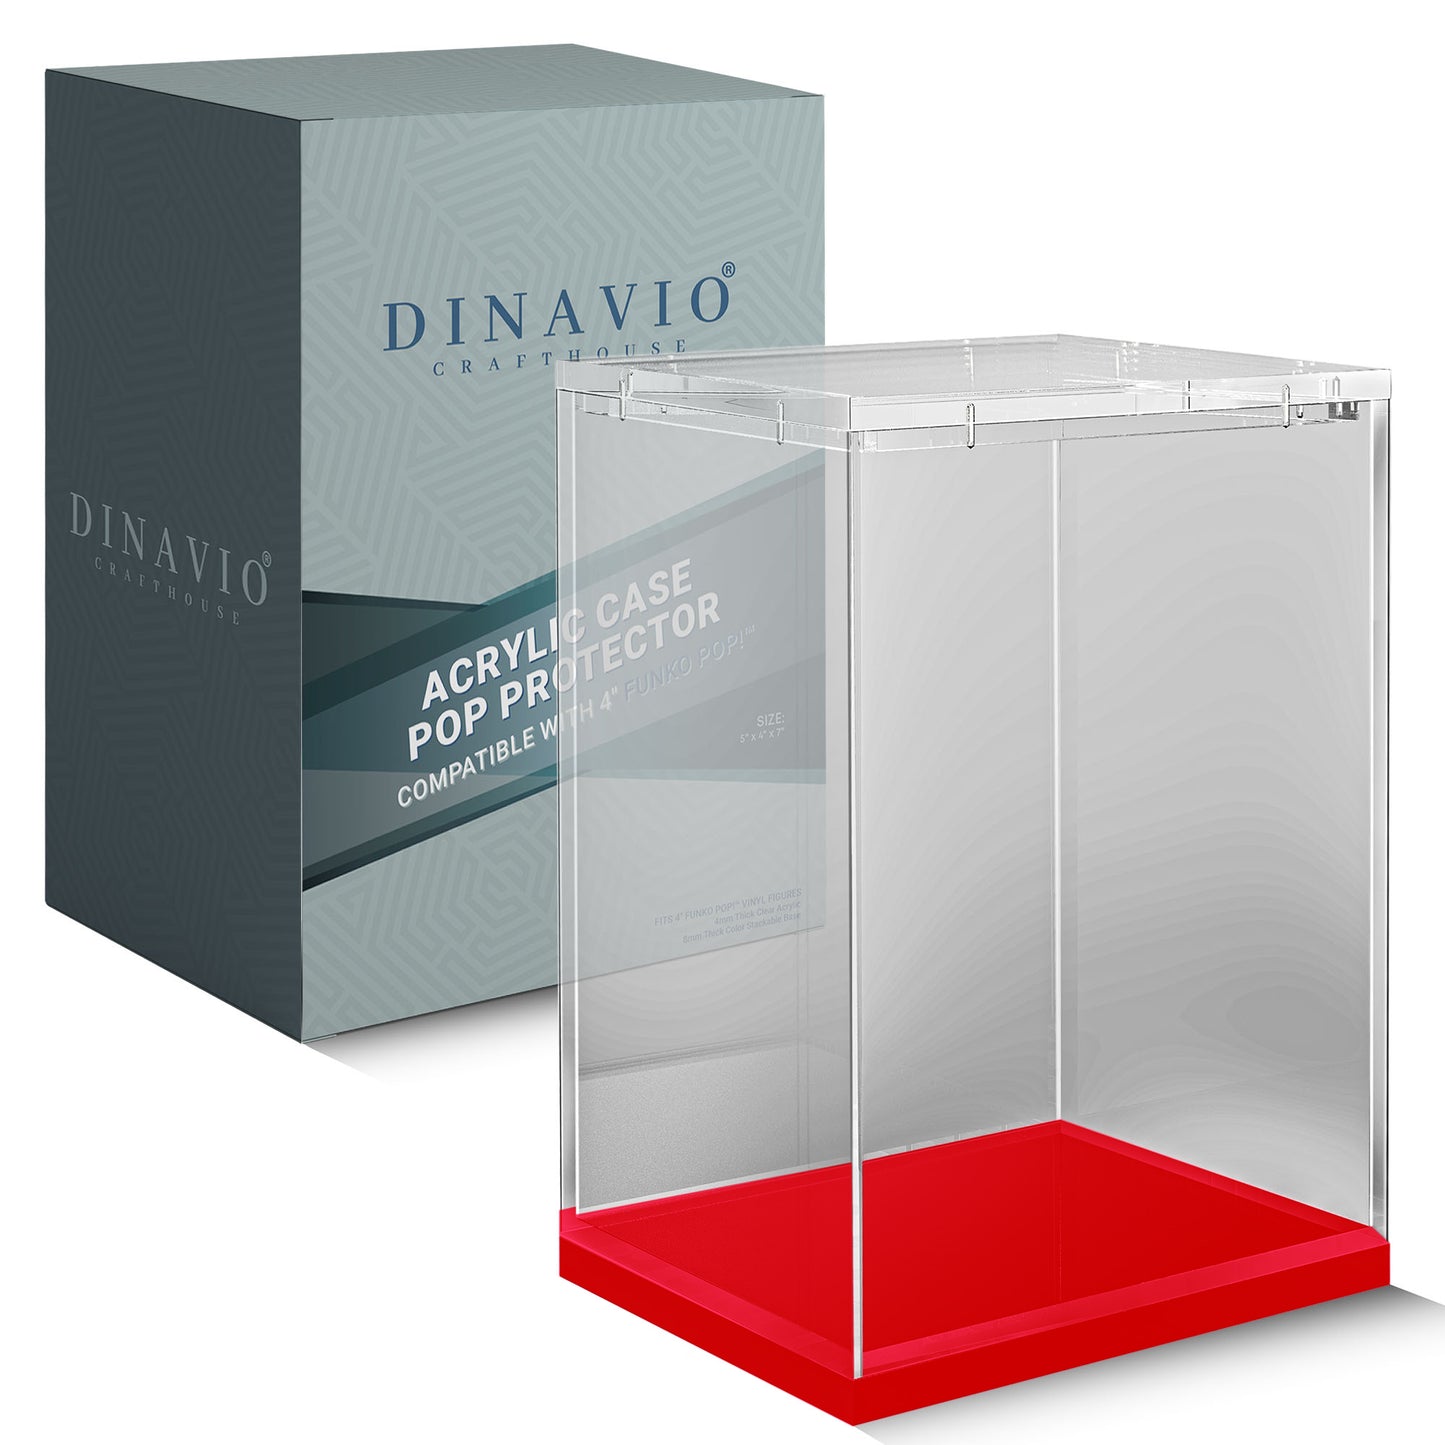 Funko Pop Acrylic Display Display Case with Colored Base